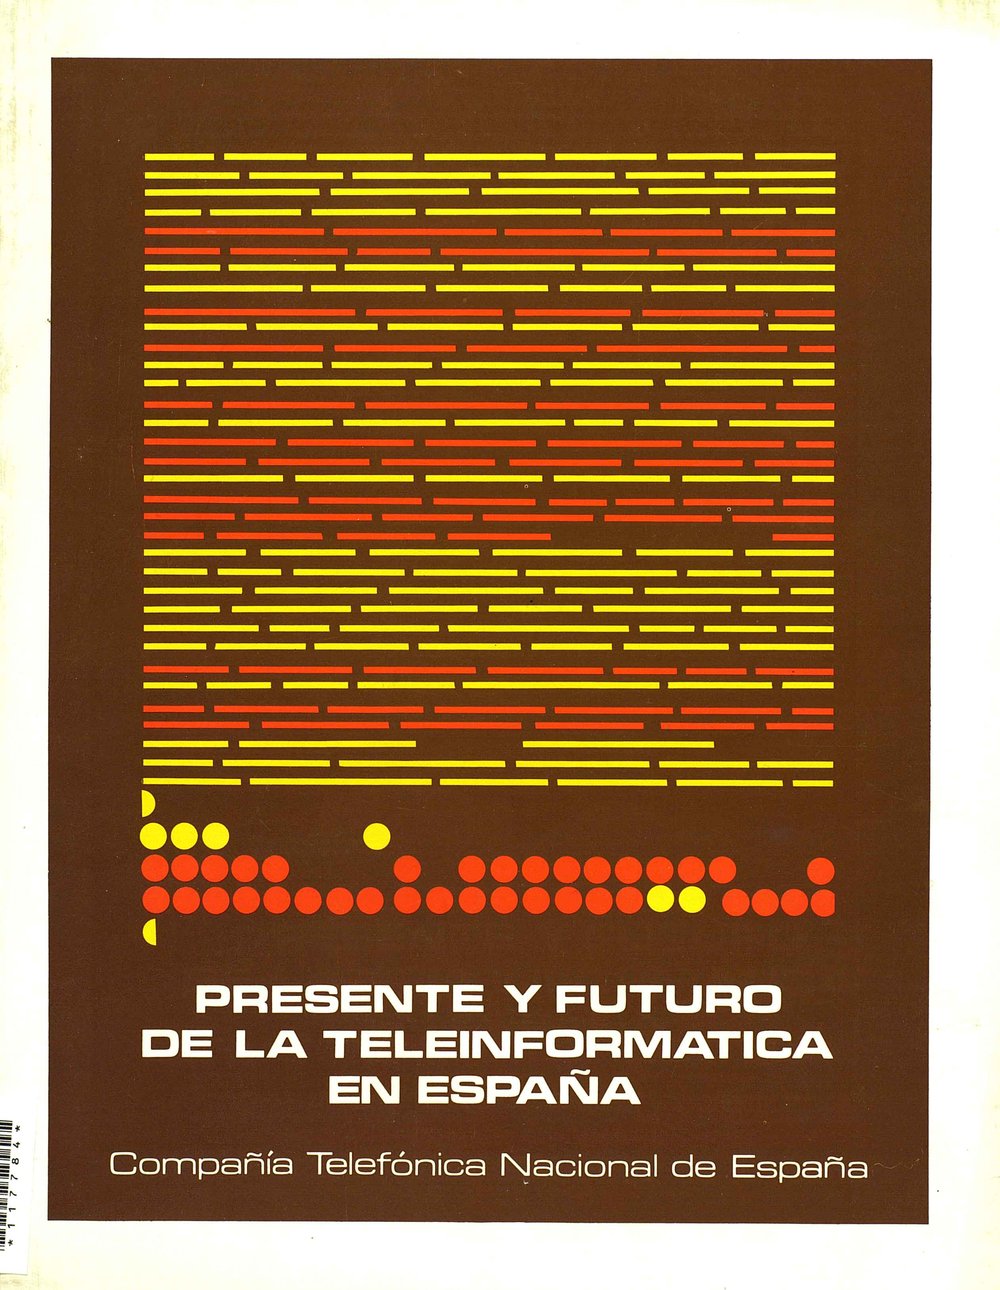 PRESENT AND FUTURE OF TELEINFORMATICS IN SPAIN